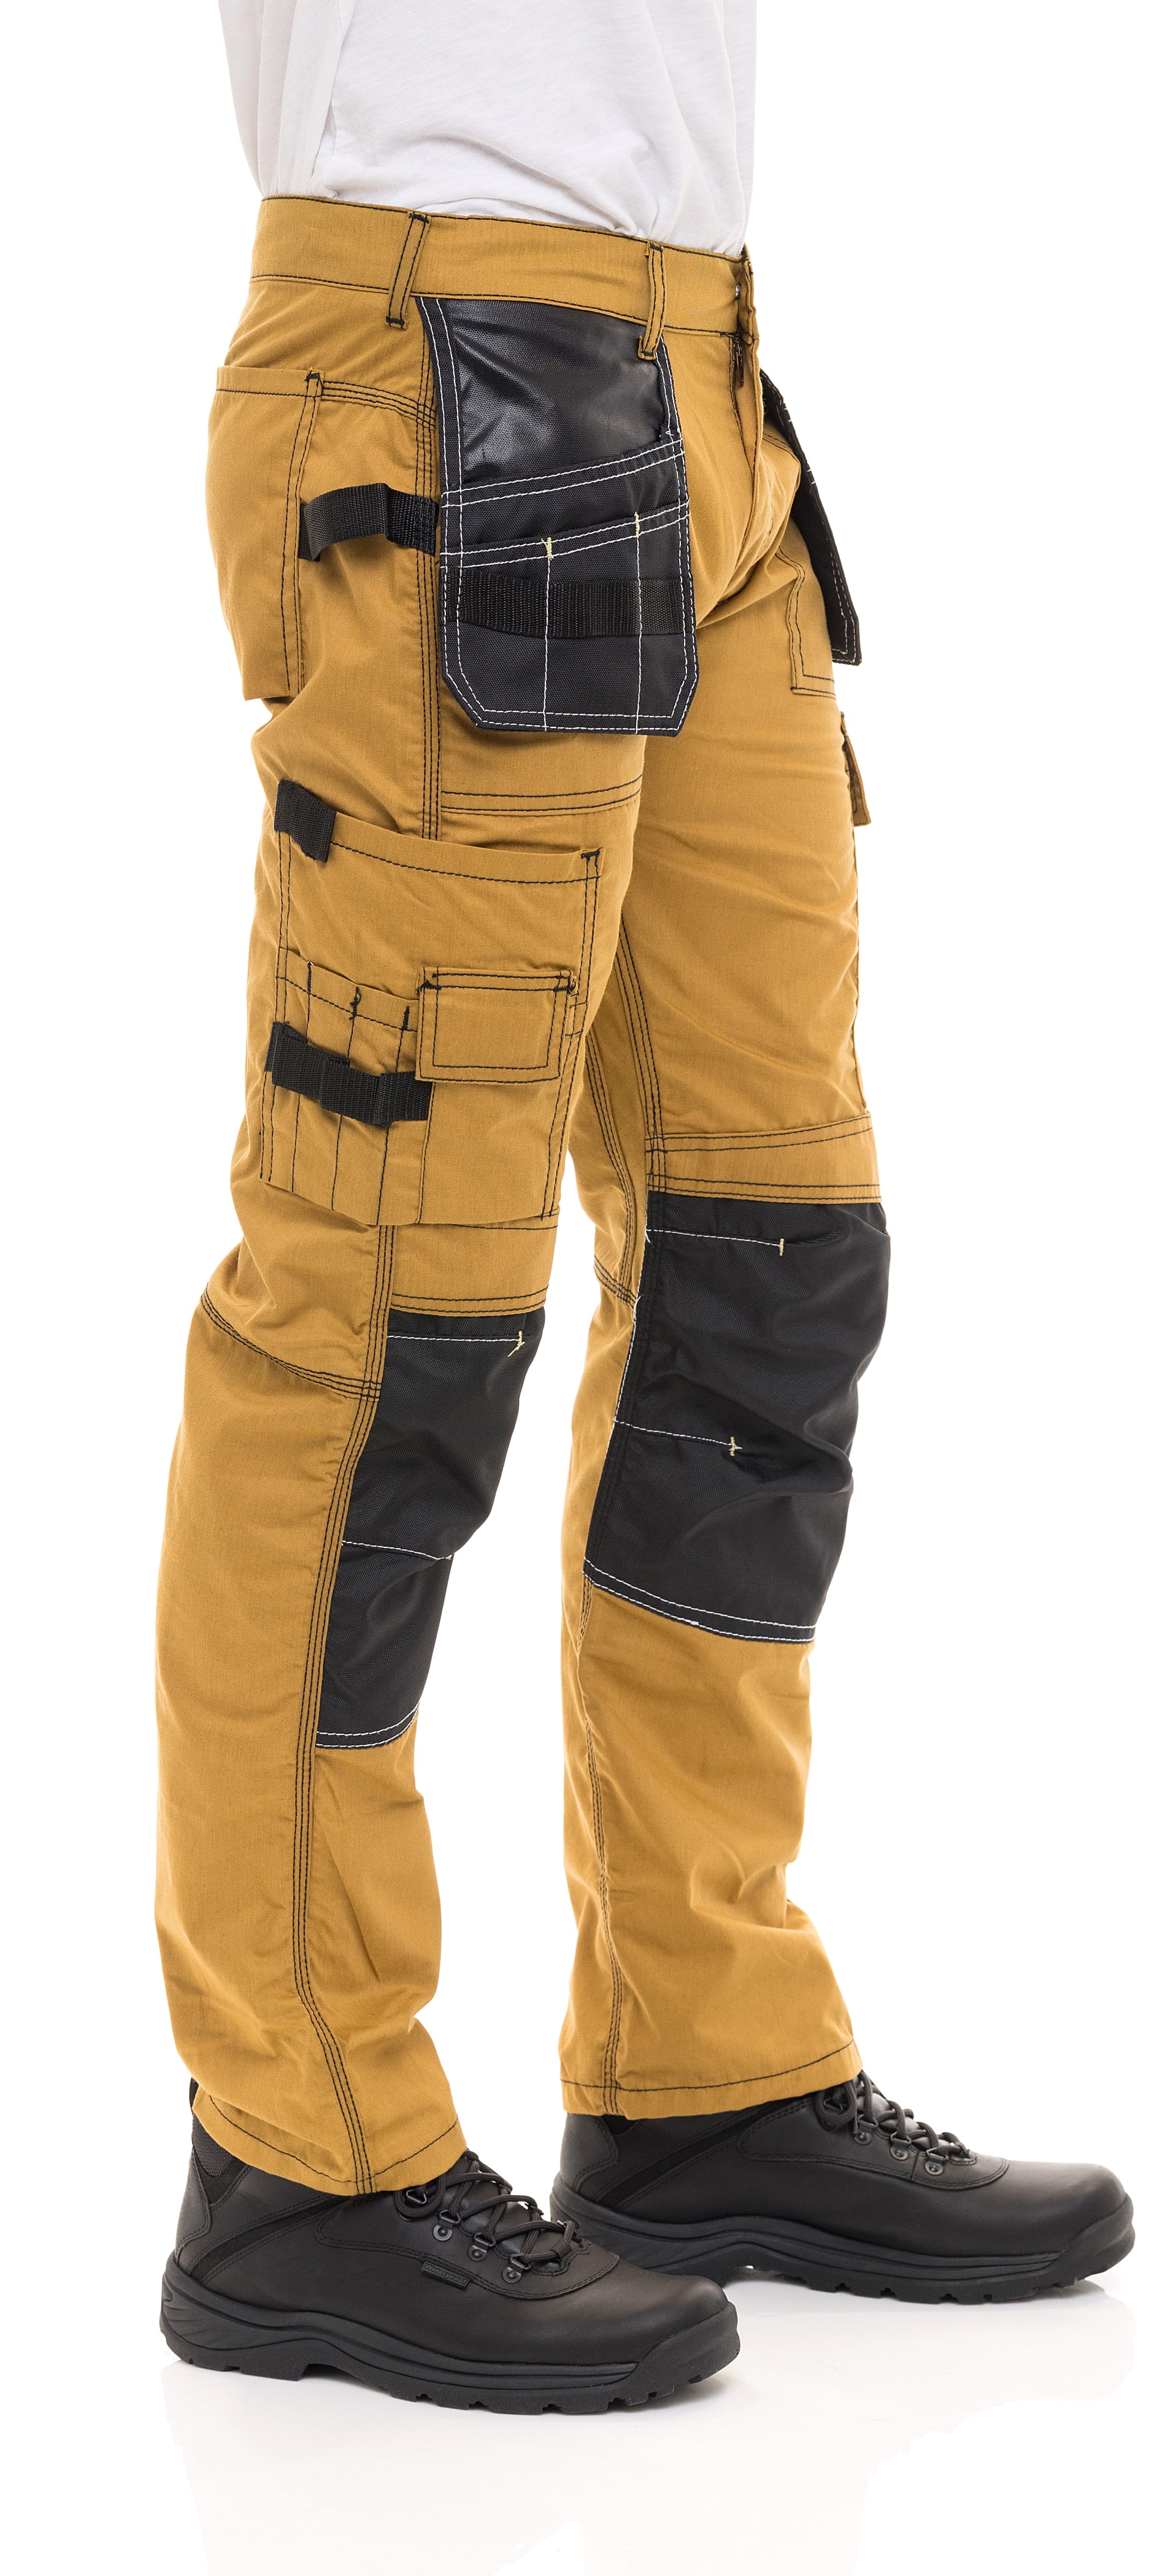 LMA Workwear Argile Two Tone Work Trousers with Kneepad Pockets